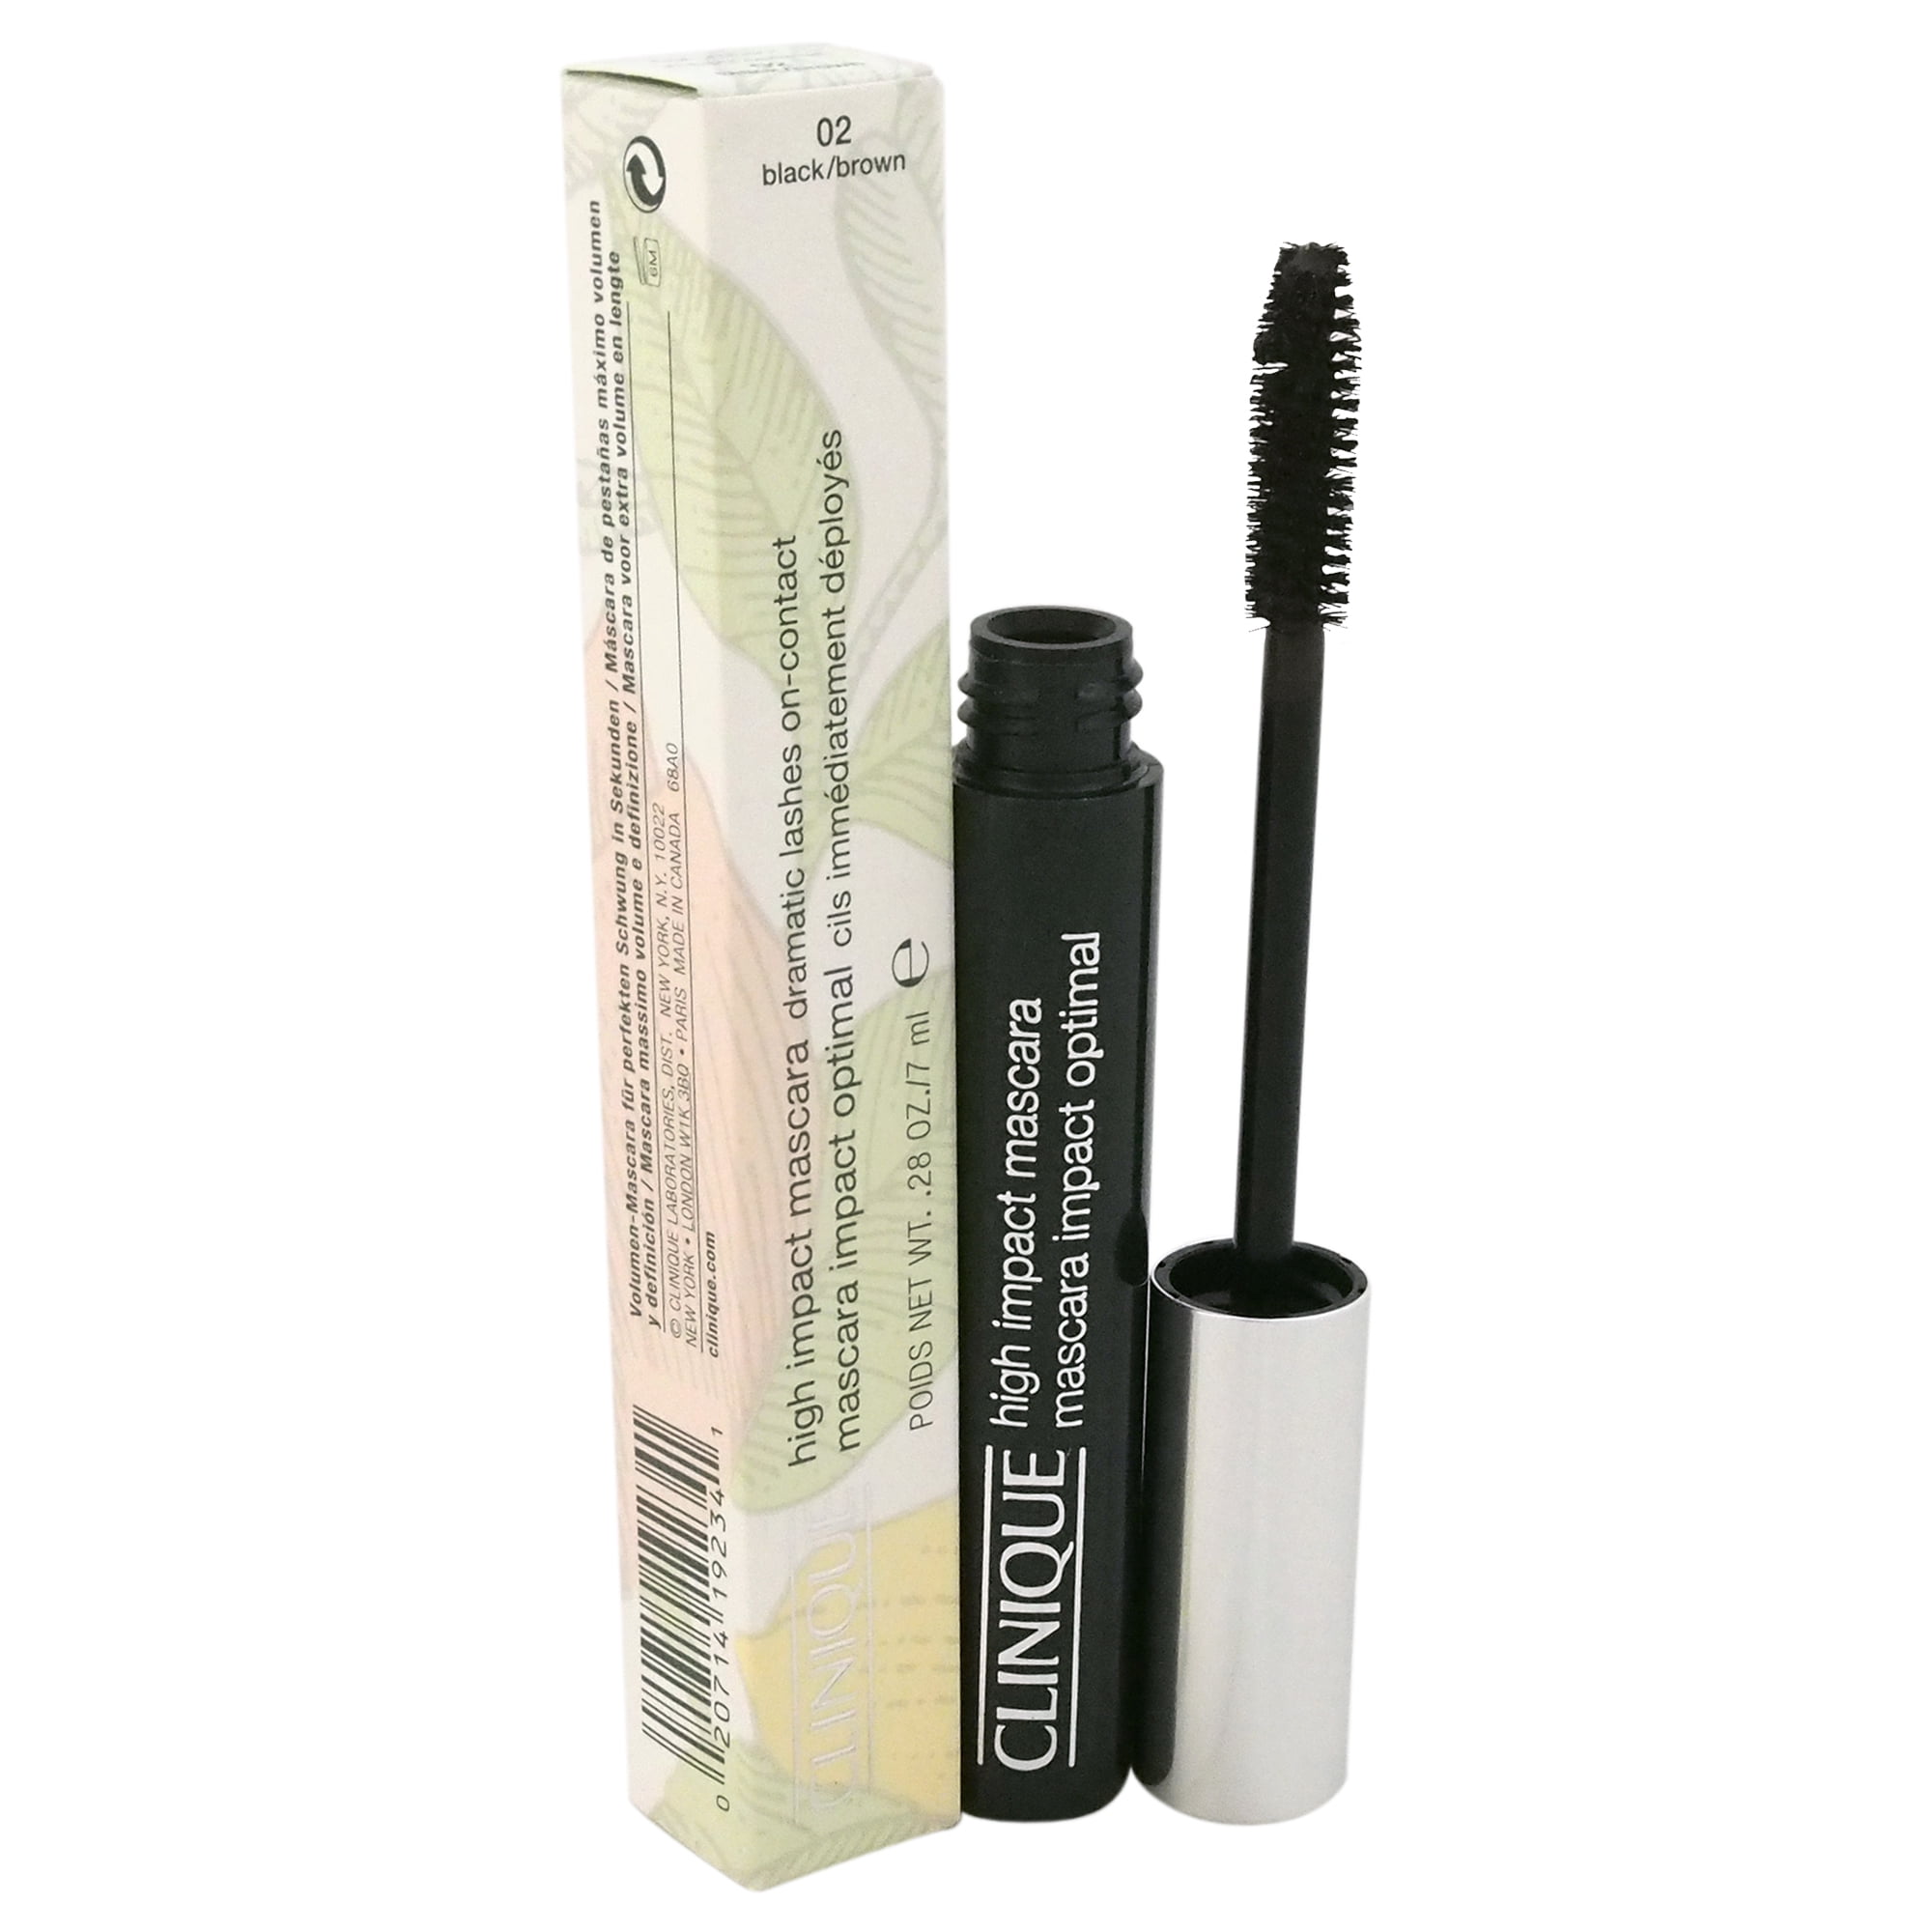 Bewust worden Stoffig Graan High Impact Mascara Dramatic Lashes On-Contact - #02 Black/Brown by Clinique  for Women - 0.28 oz Mascara - Walmart.com